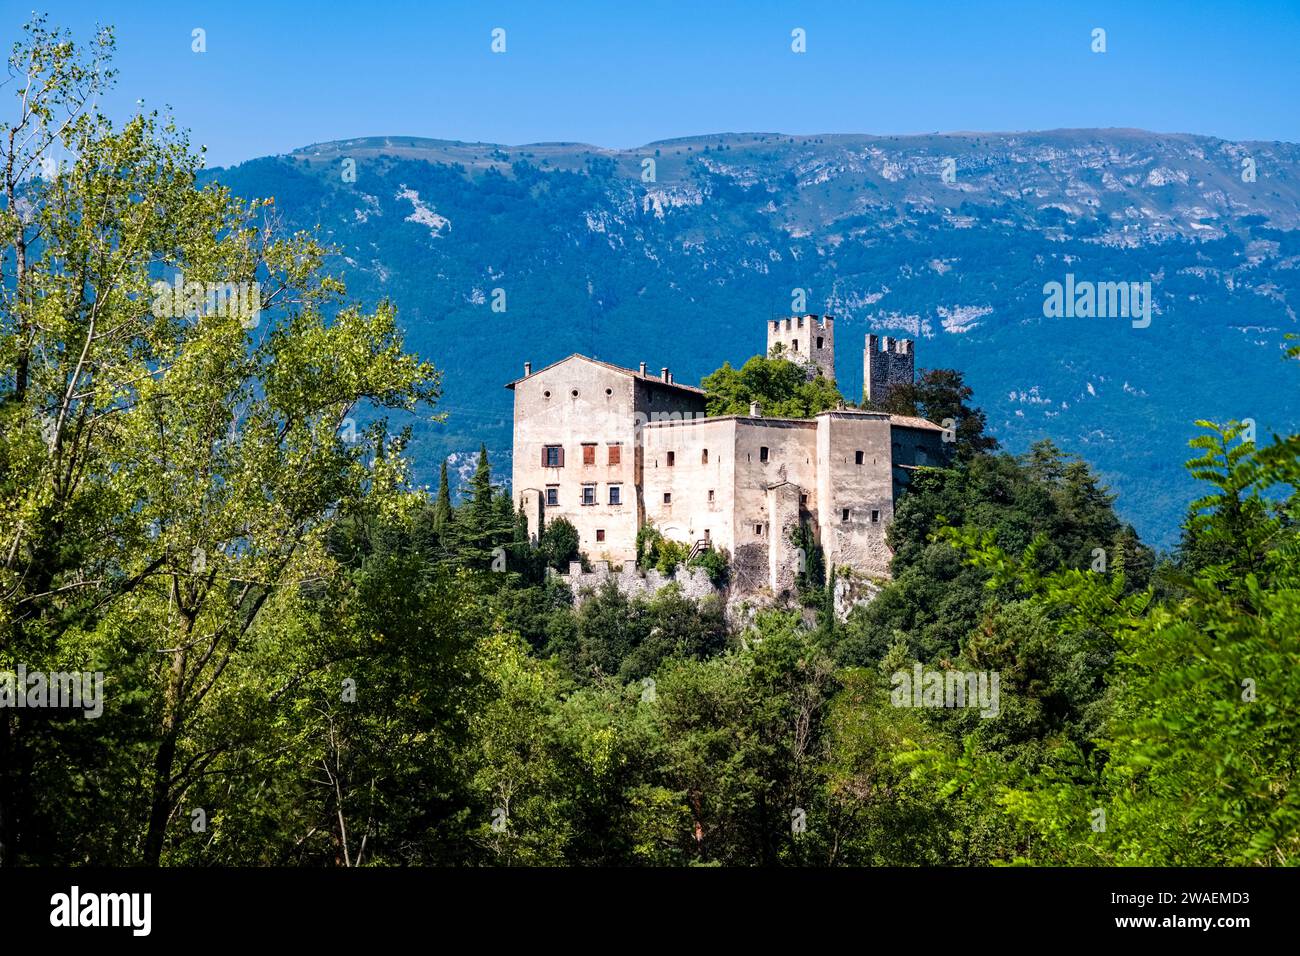 The castle Castel Toblino, built in the 14th century, situated on a peninsula of the lake Lago di Toblino, sticking out of trees. Stock Photo